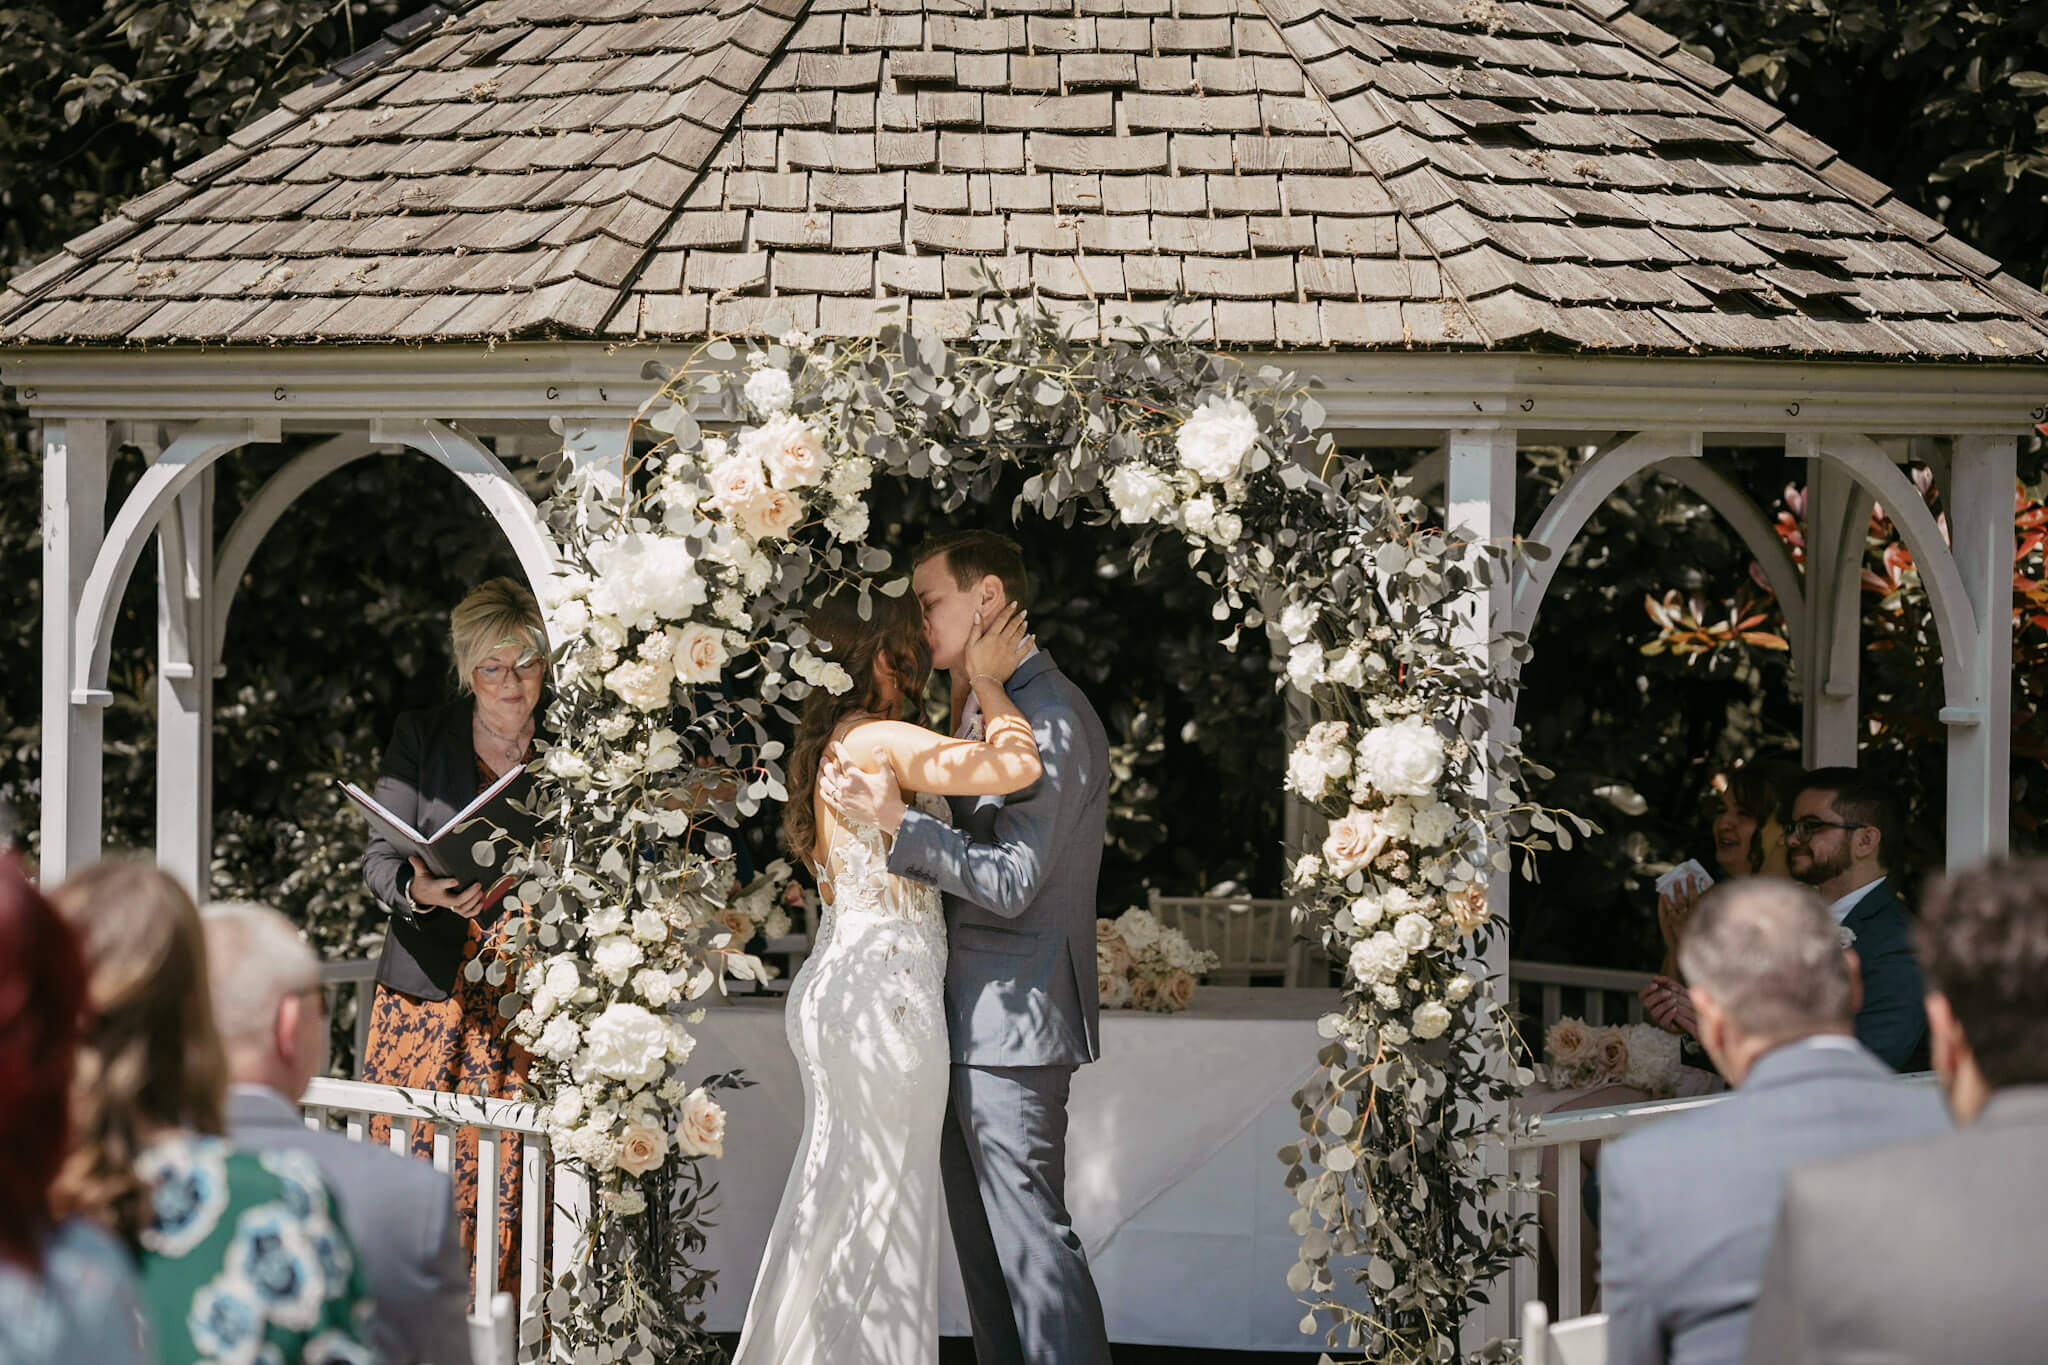 Couple kissing under wedding flower archway at a wedding